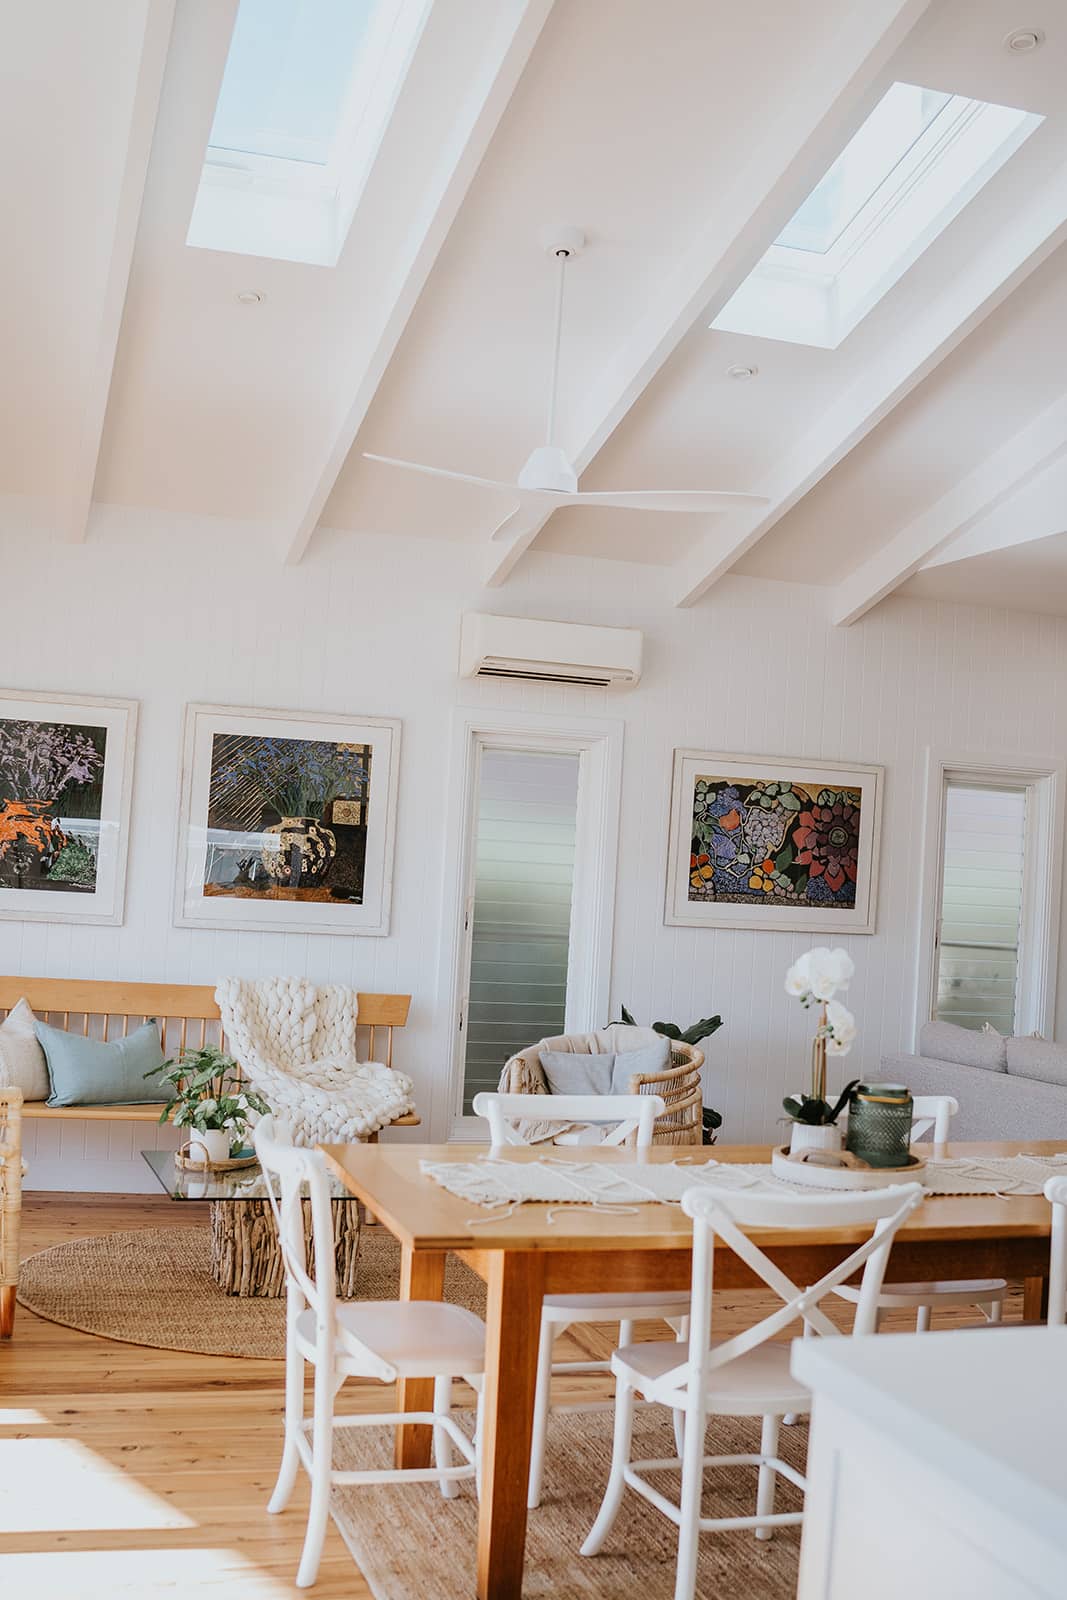 Open plan living and dining area coastal hamptons style raked ceilings with exposed rafters